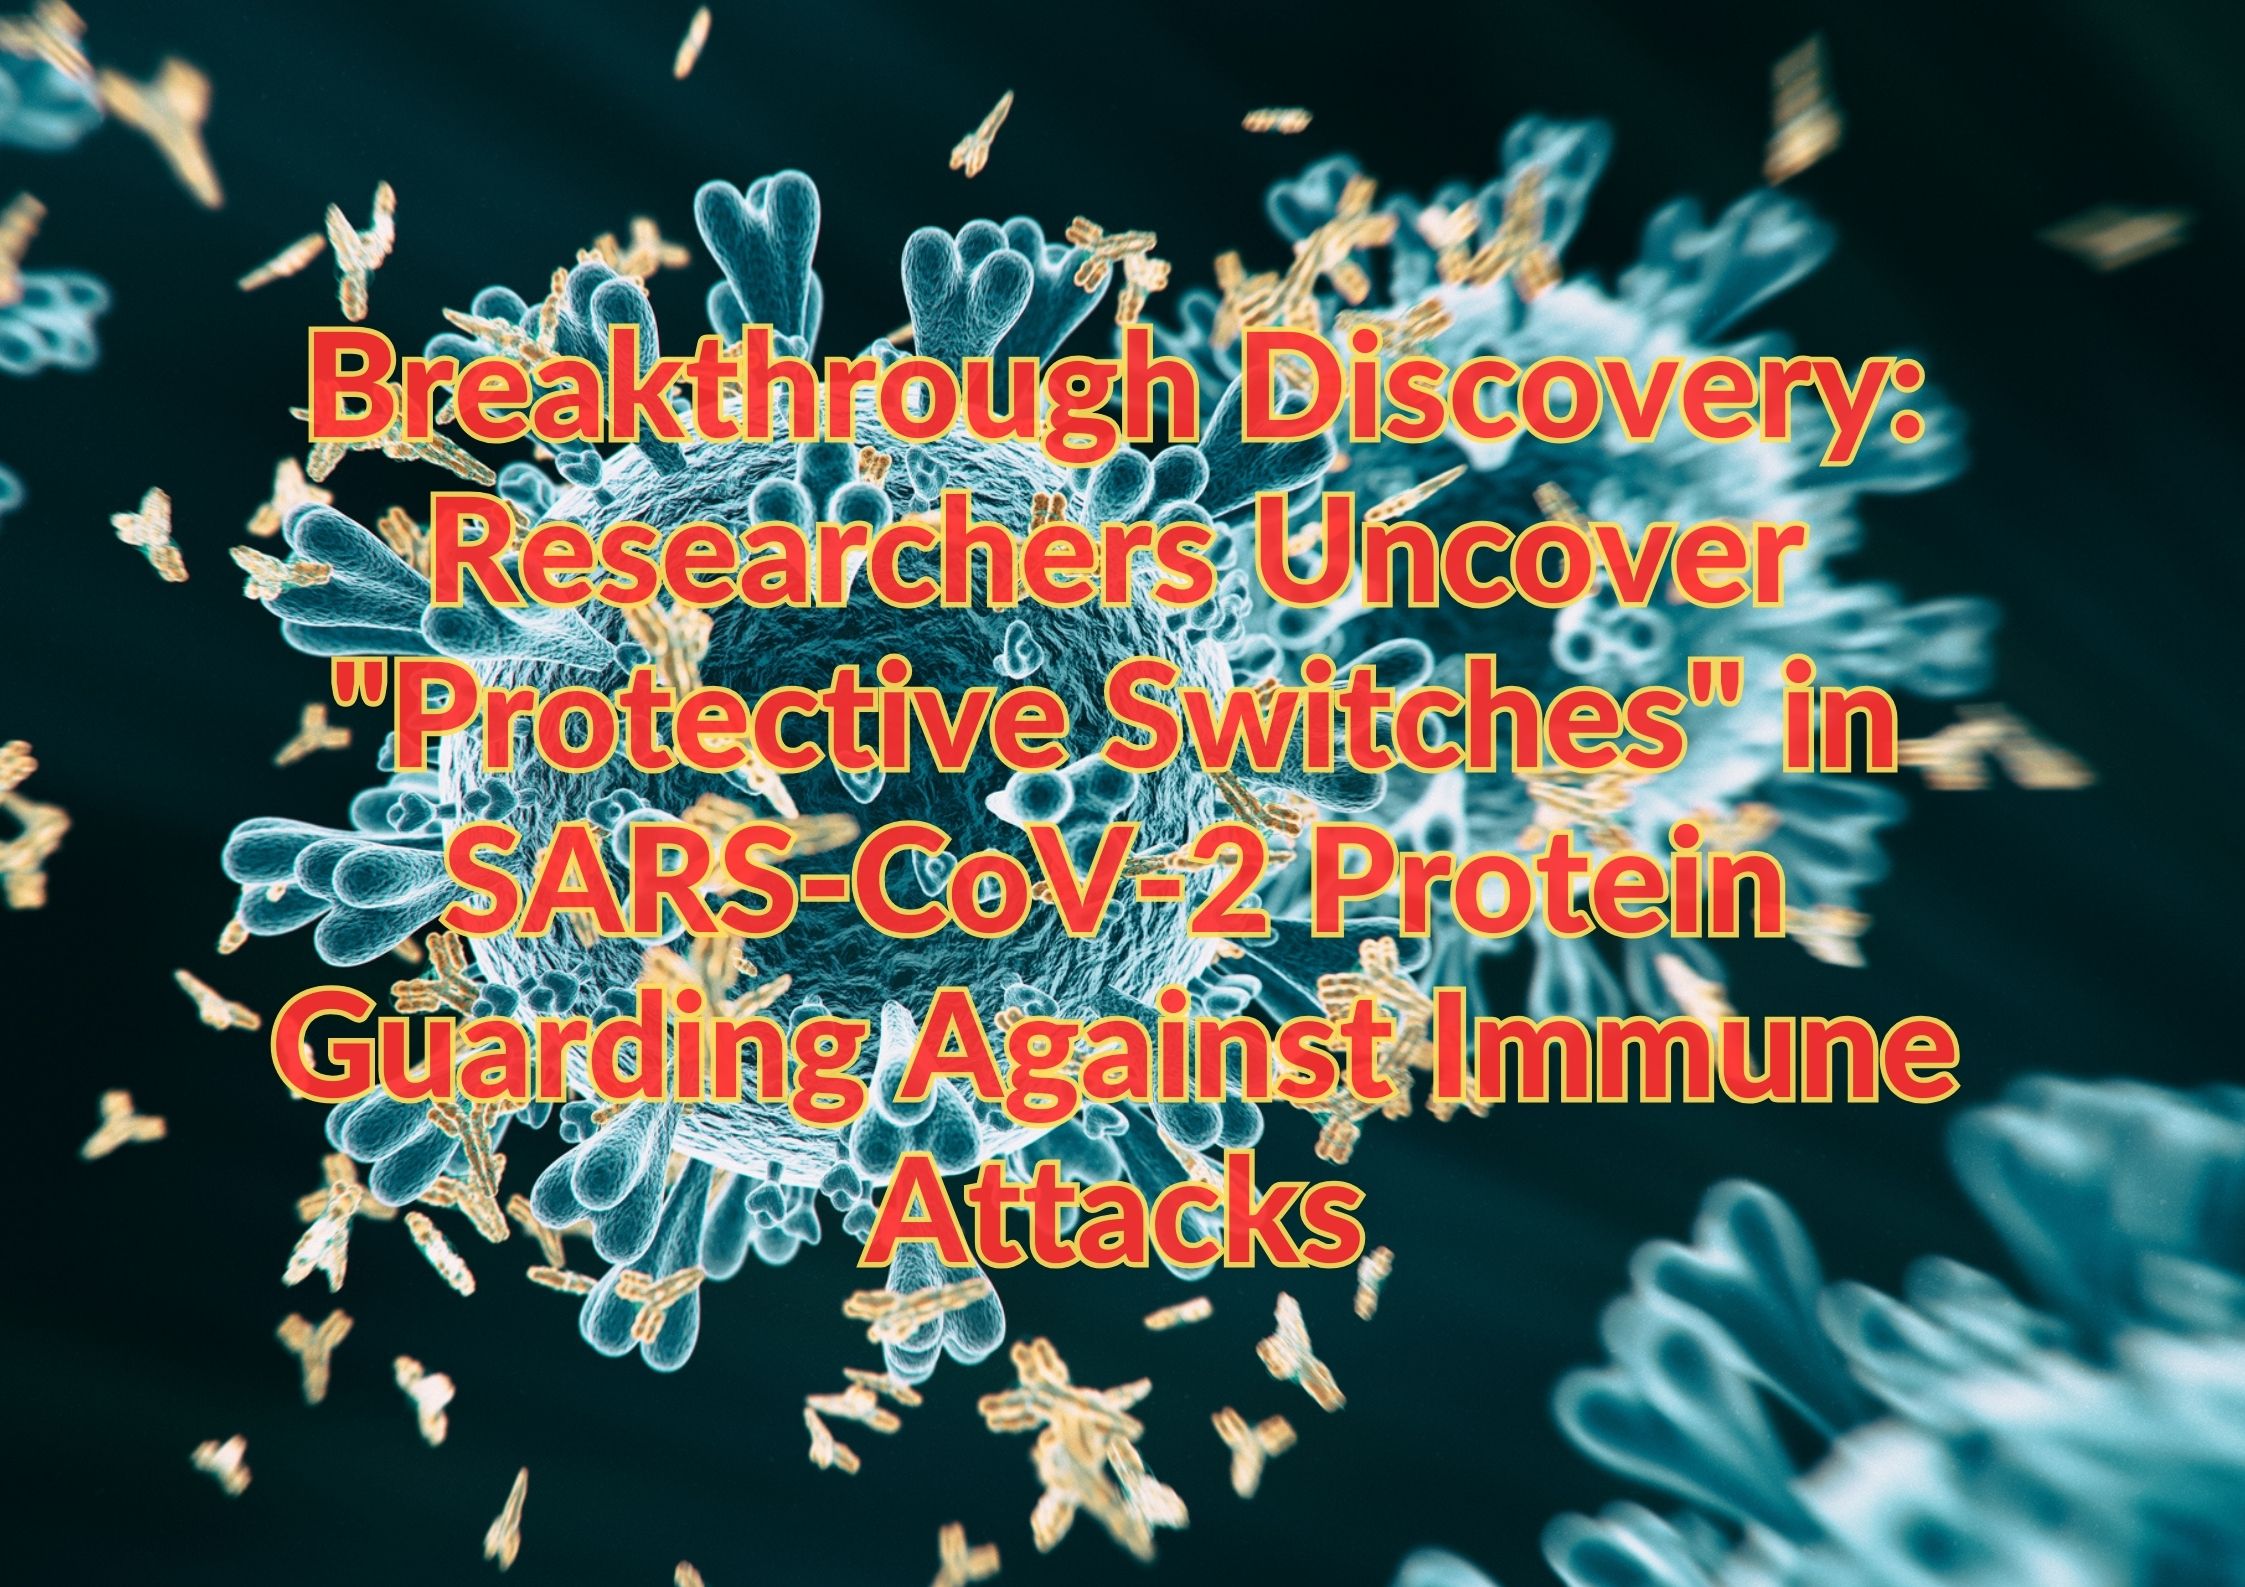 Breakthrough Discovery: Researchers Uncover "Protective Switches" in SARS-CoV-2 Protein Guarding Against Immune Attacks